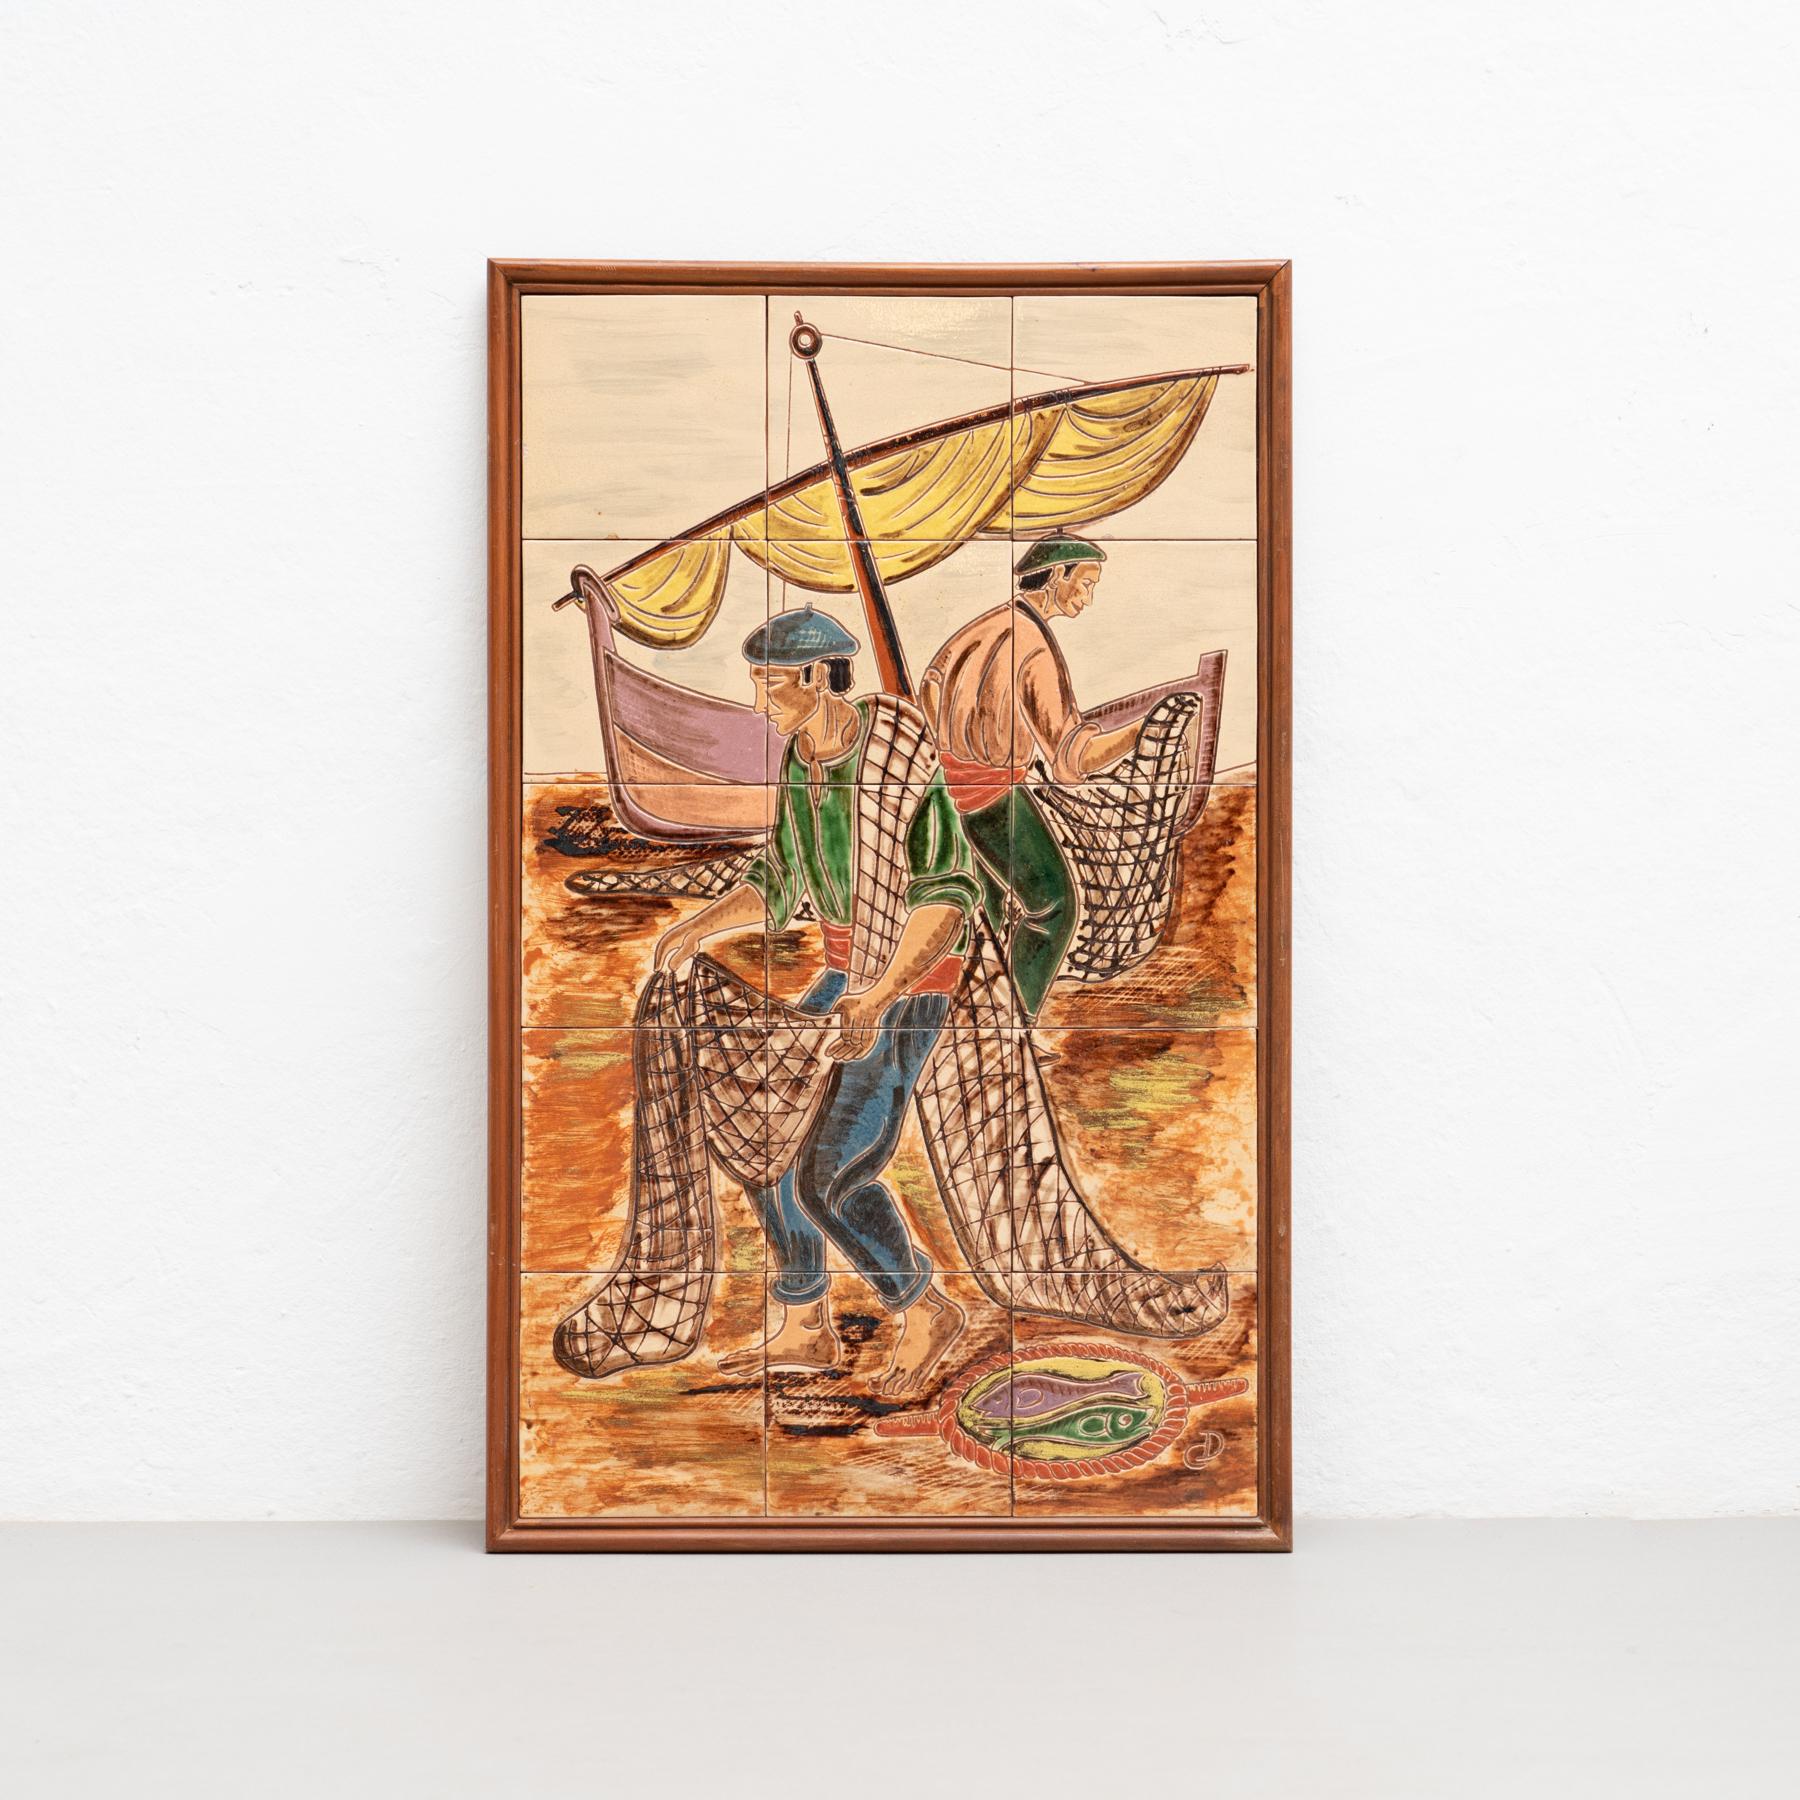 Ceramic hand painted artwork of two fisherman working by Catalan artist Diaz Costa, circa 1960.
Framed. Signed.

In original condition, with minor wear consistent of age and use, preserving a beautiul patina.